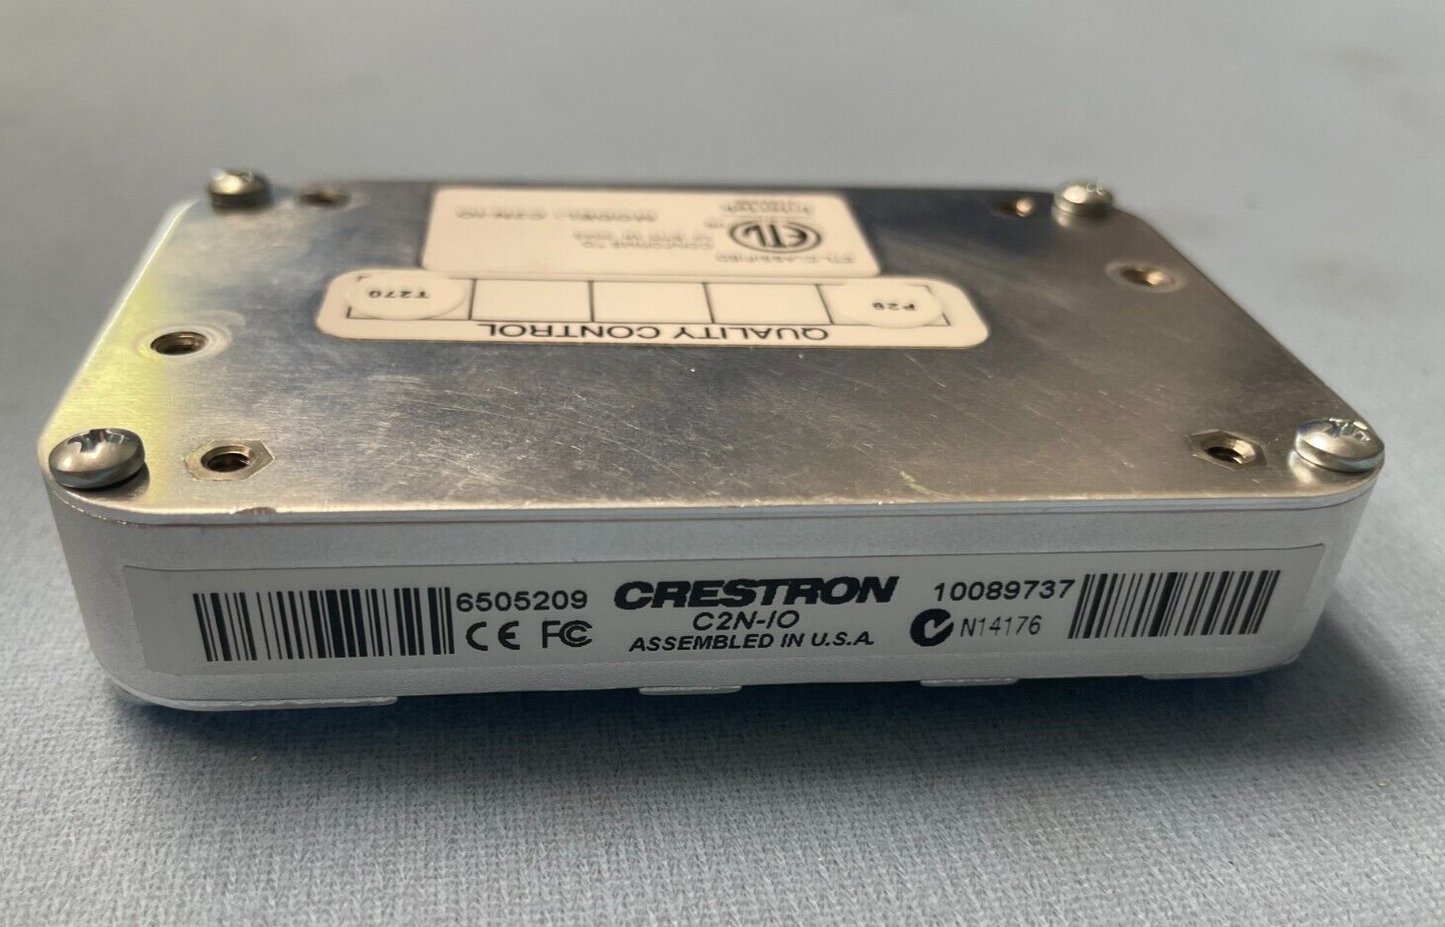 Crestron C2N-IO Control Port Expansion Module for Crestron Control Systems